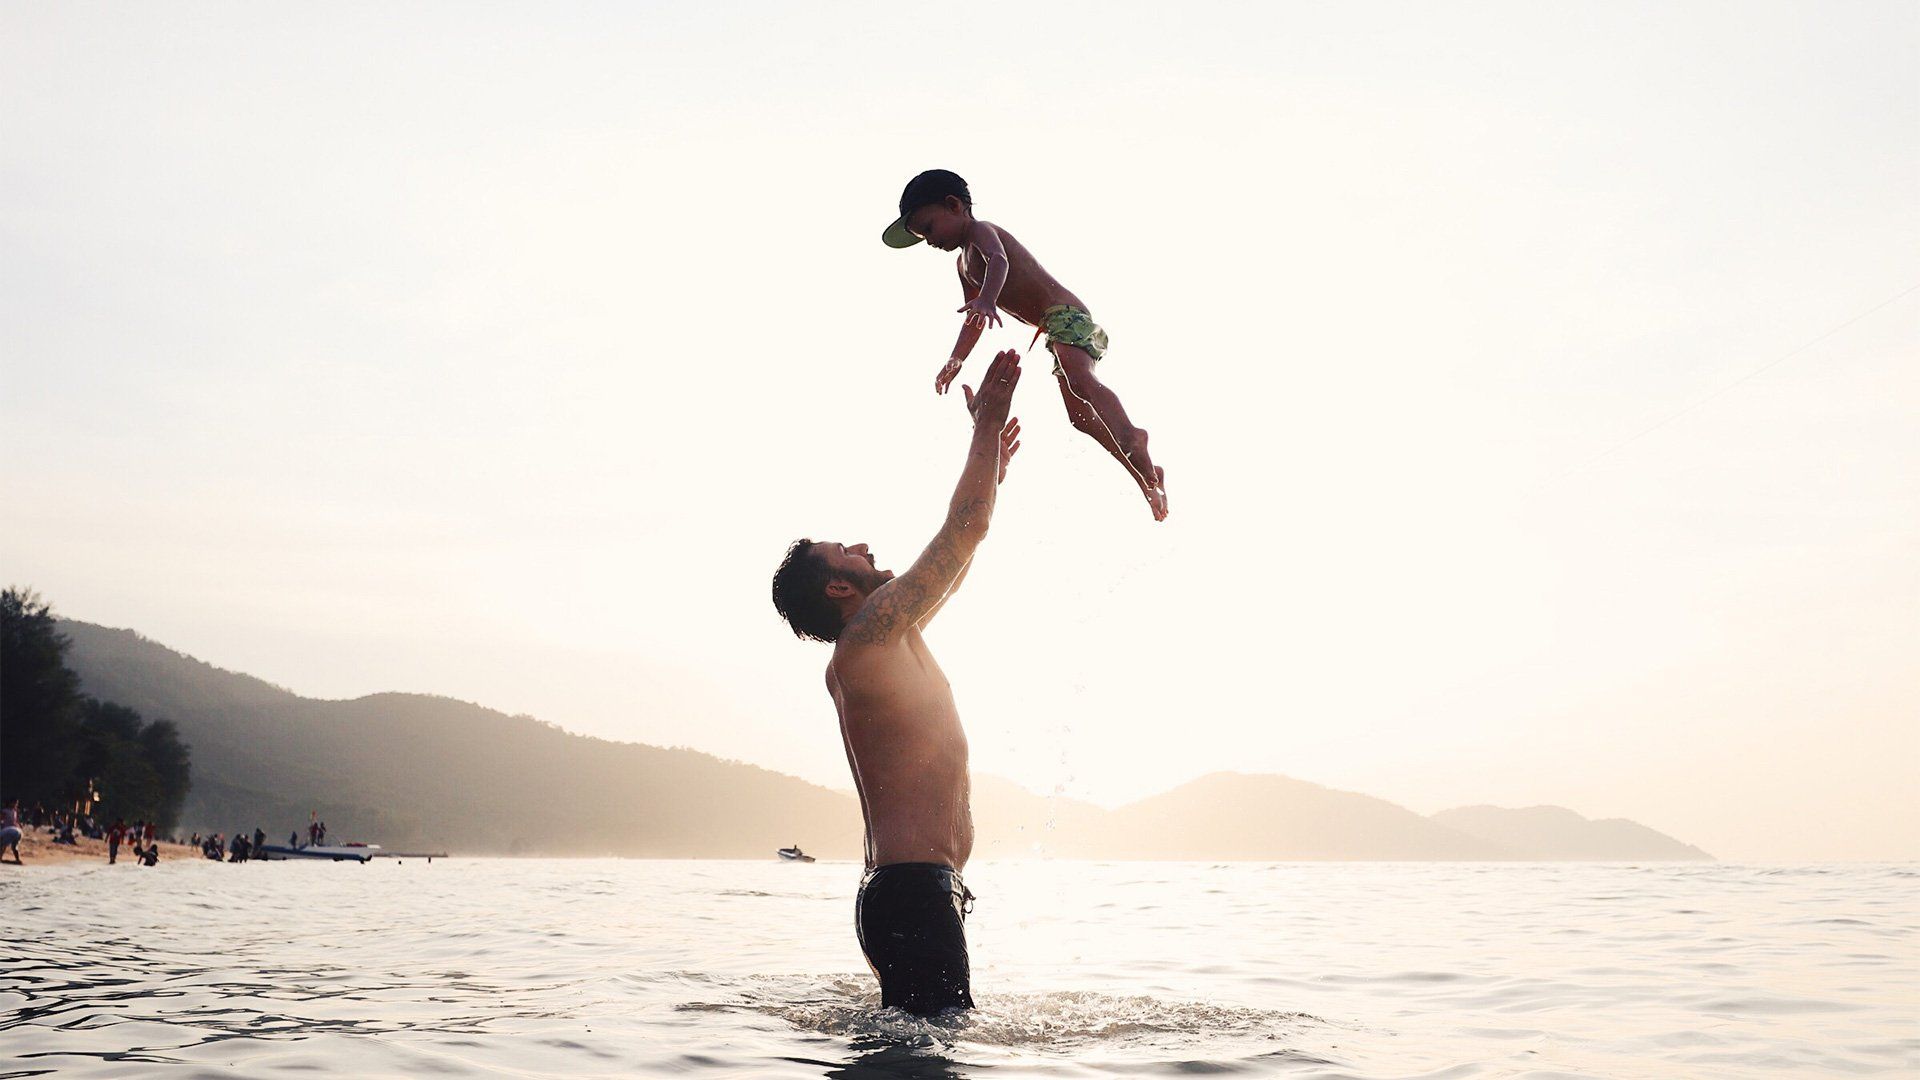 A man stands in the sea and throws his son in the air. Photo by Christian Anderl.